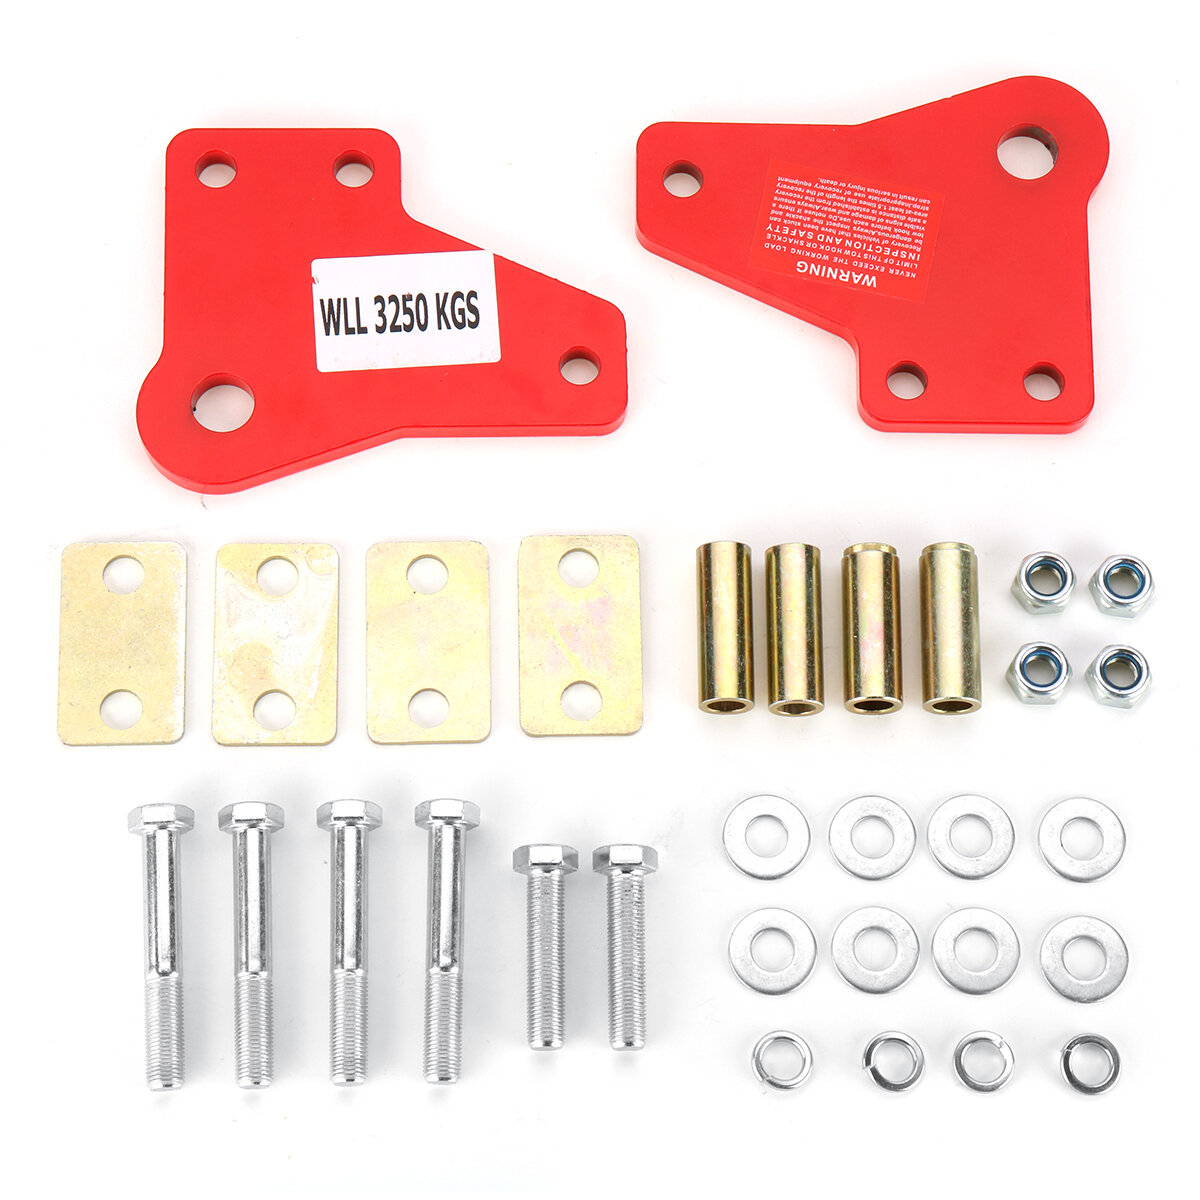 2 stuks Front Recovery Tow Point Kit Pull Starter Kits 3250 KG Voor Toyota Hilux KUN26 N70 2005-2015